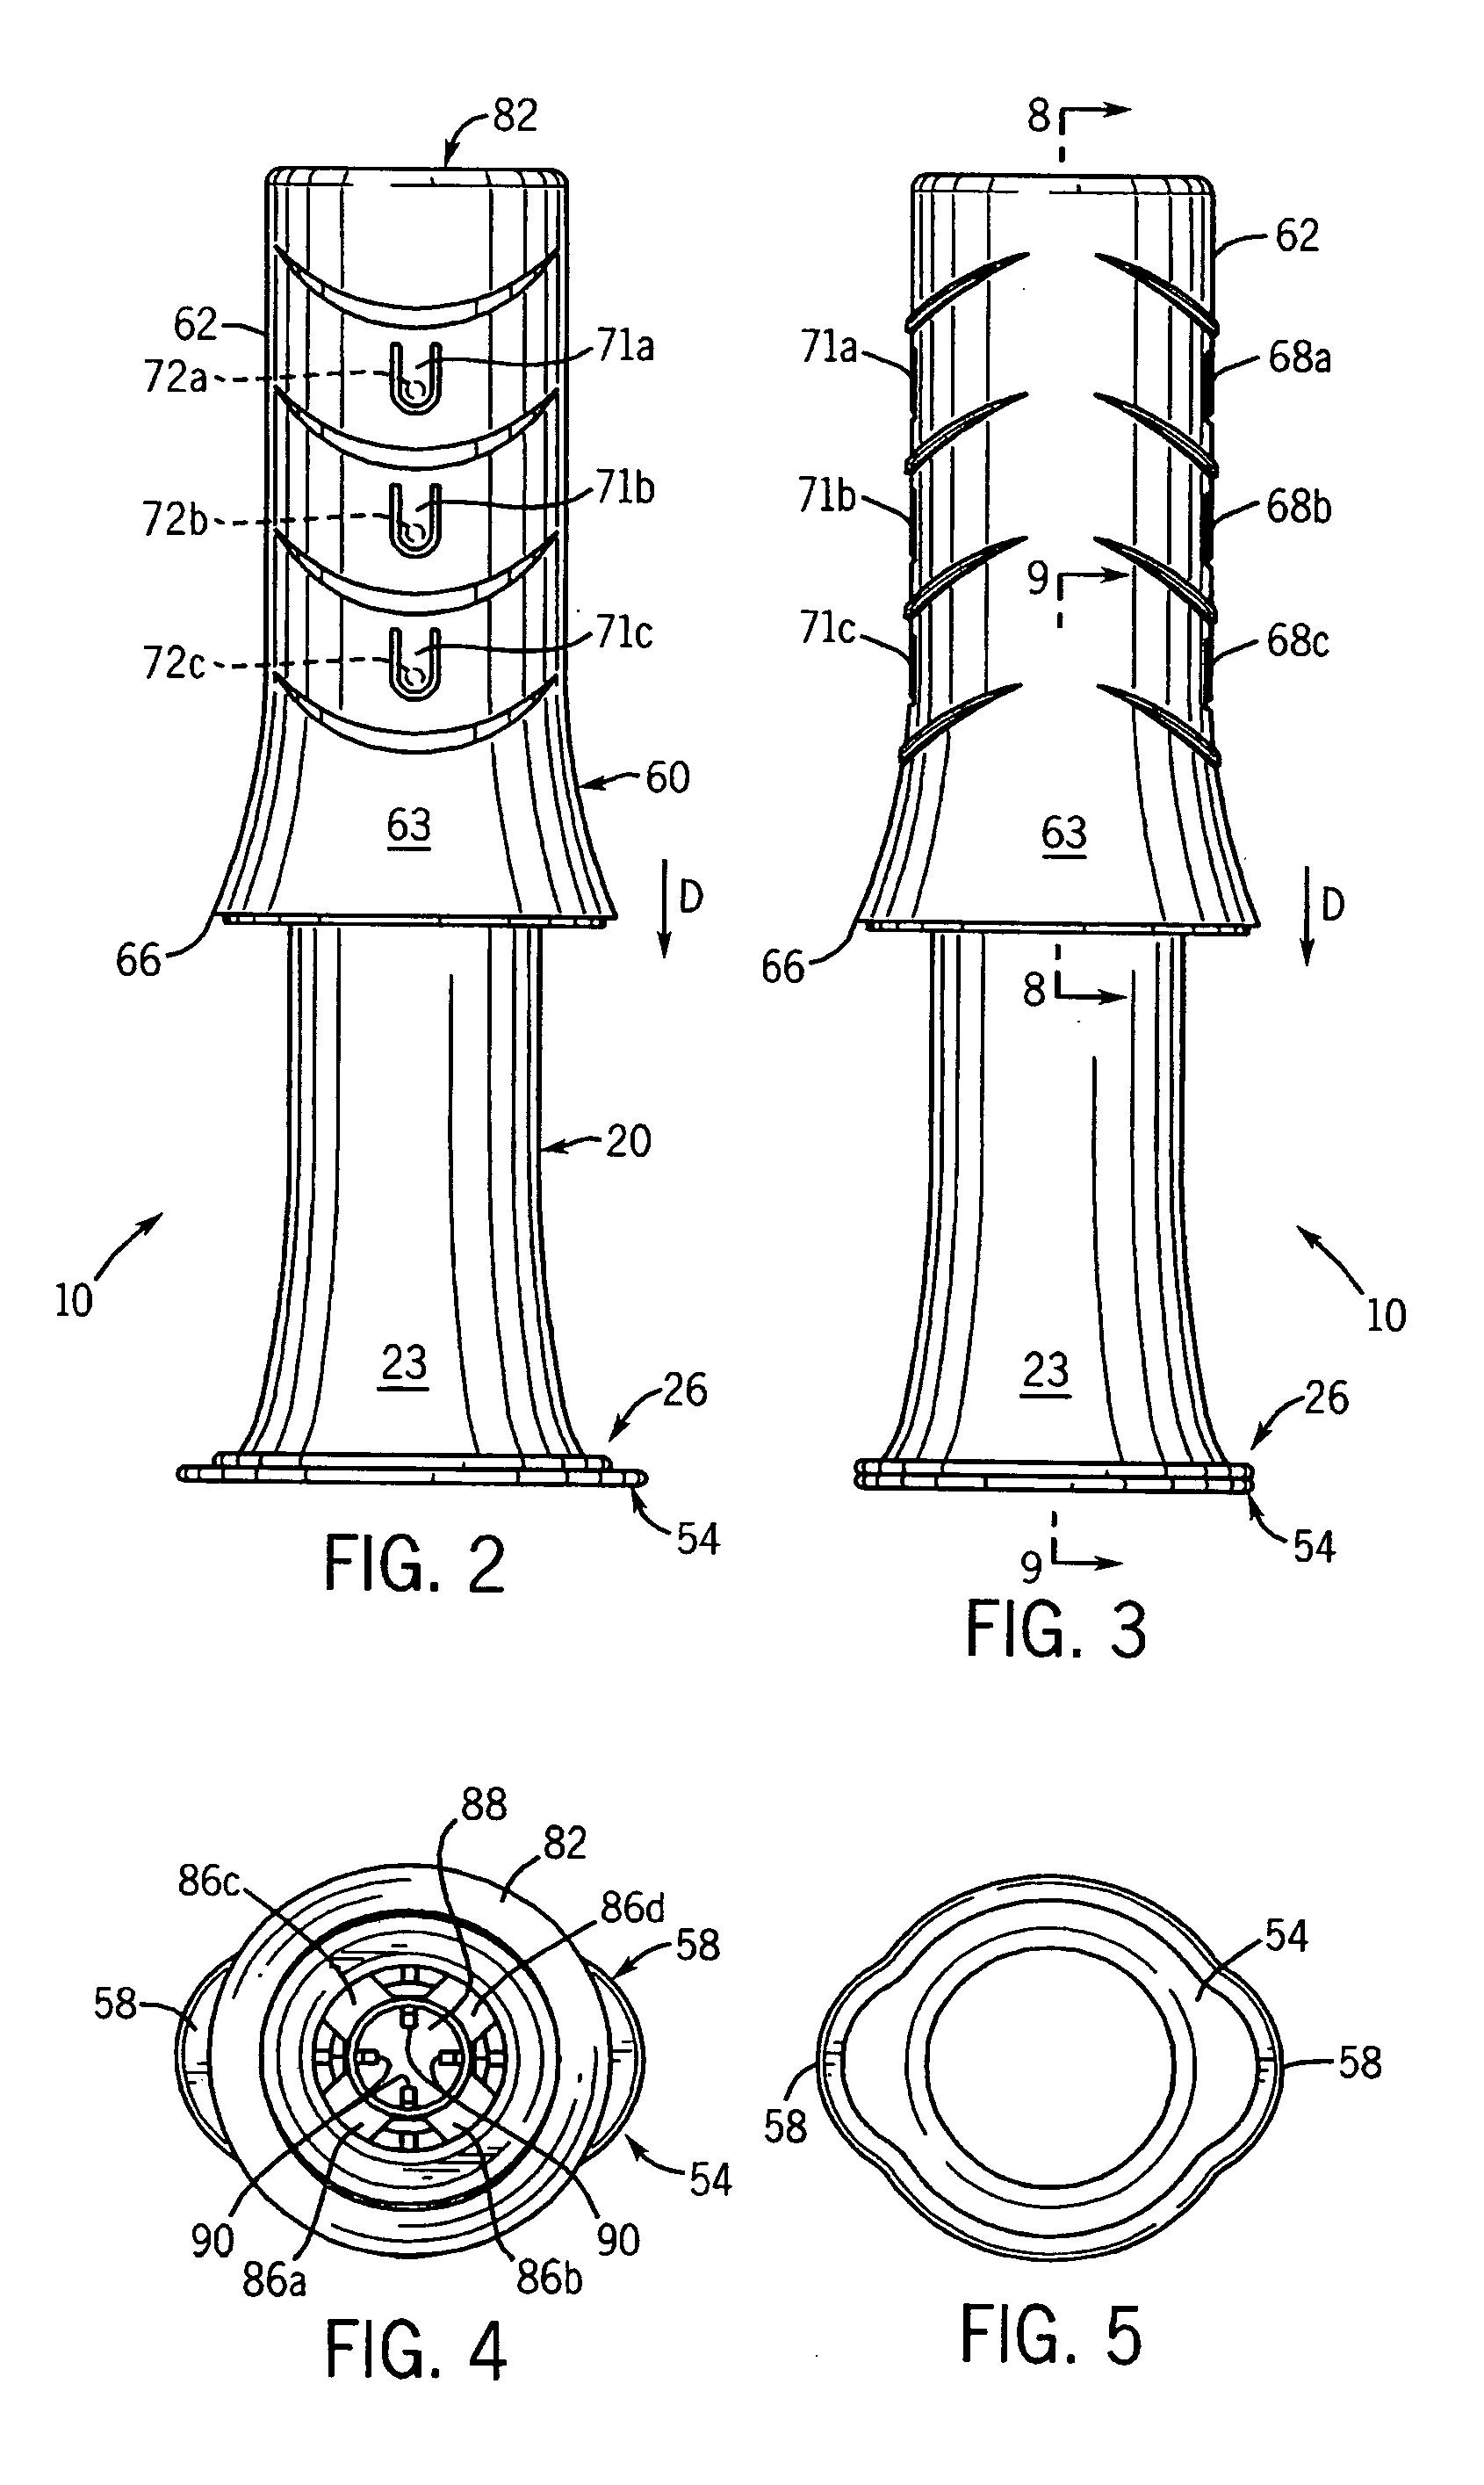 Device for dispensing a controlled dose of a flowable material